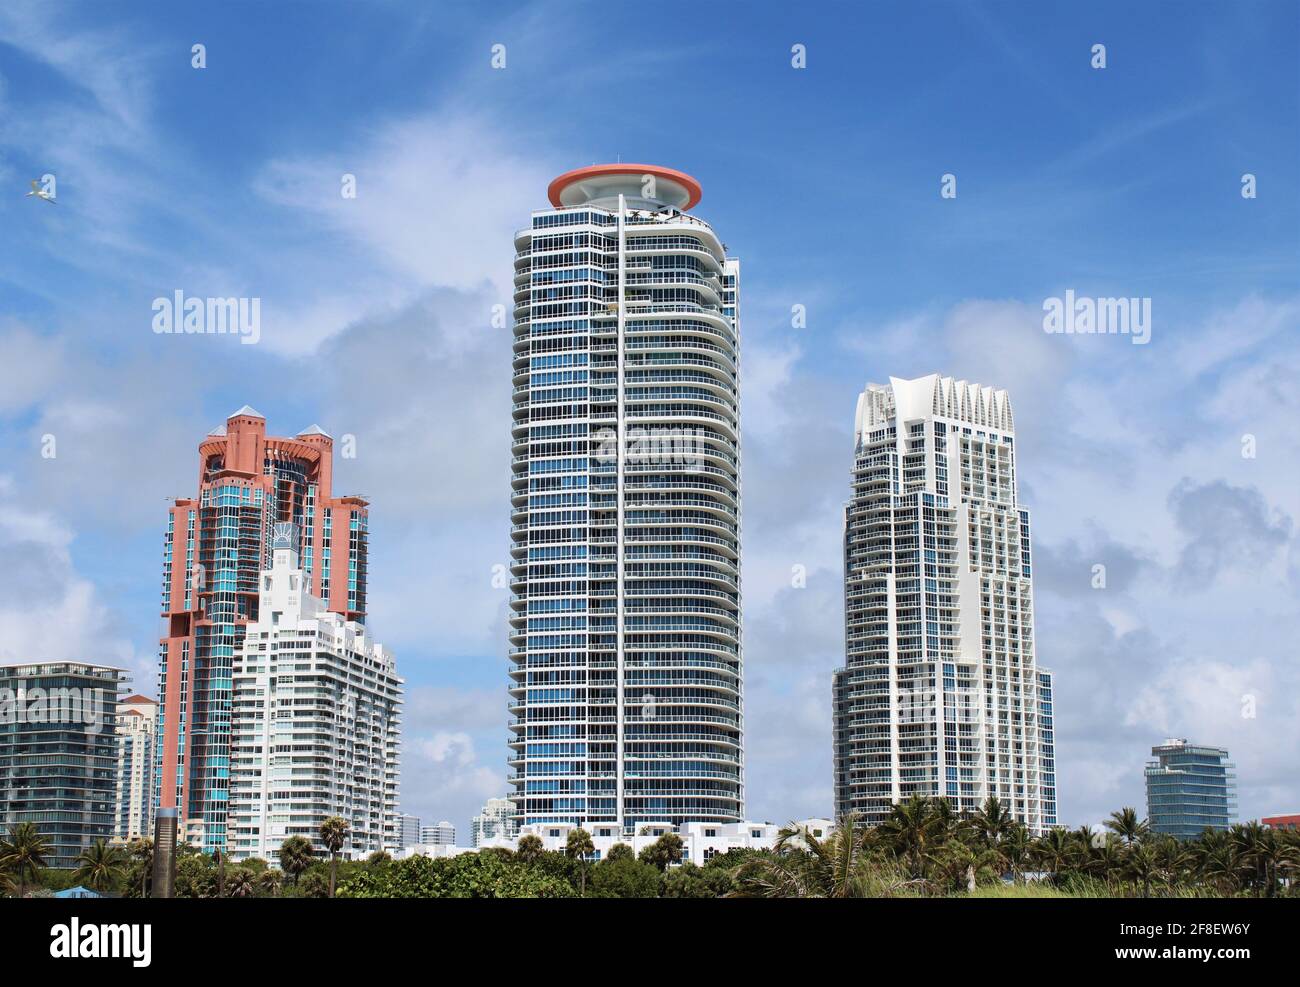 South Pointe Condo Buildings in Miami Beach, Florida on South Beach. Condominium buildings with apartments for sale and for rent. Stock Photo